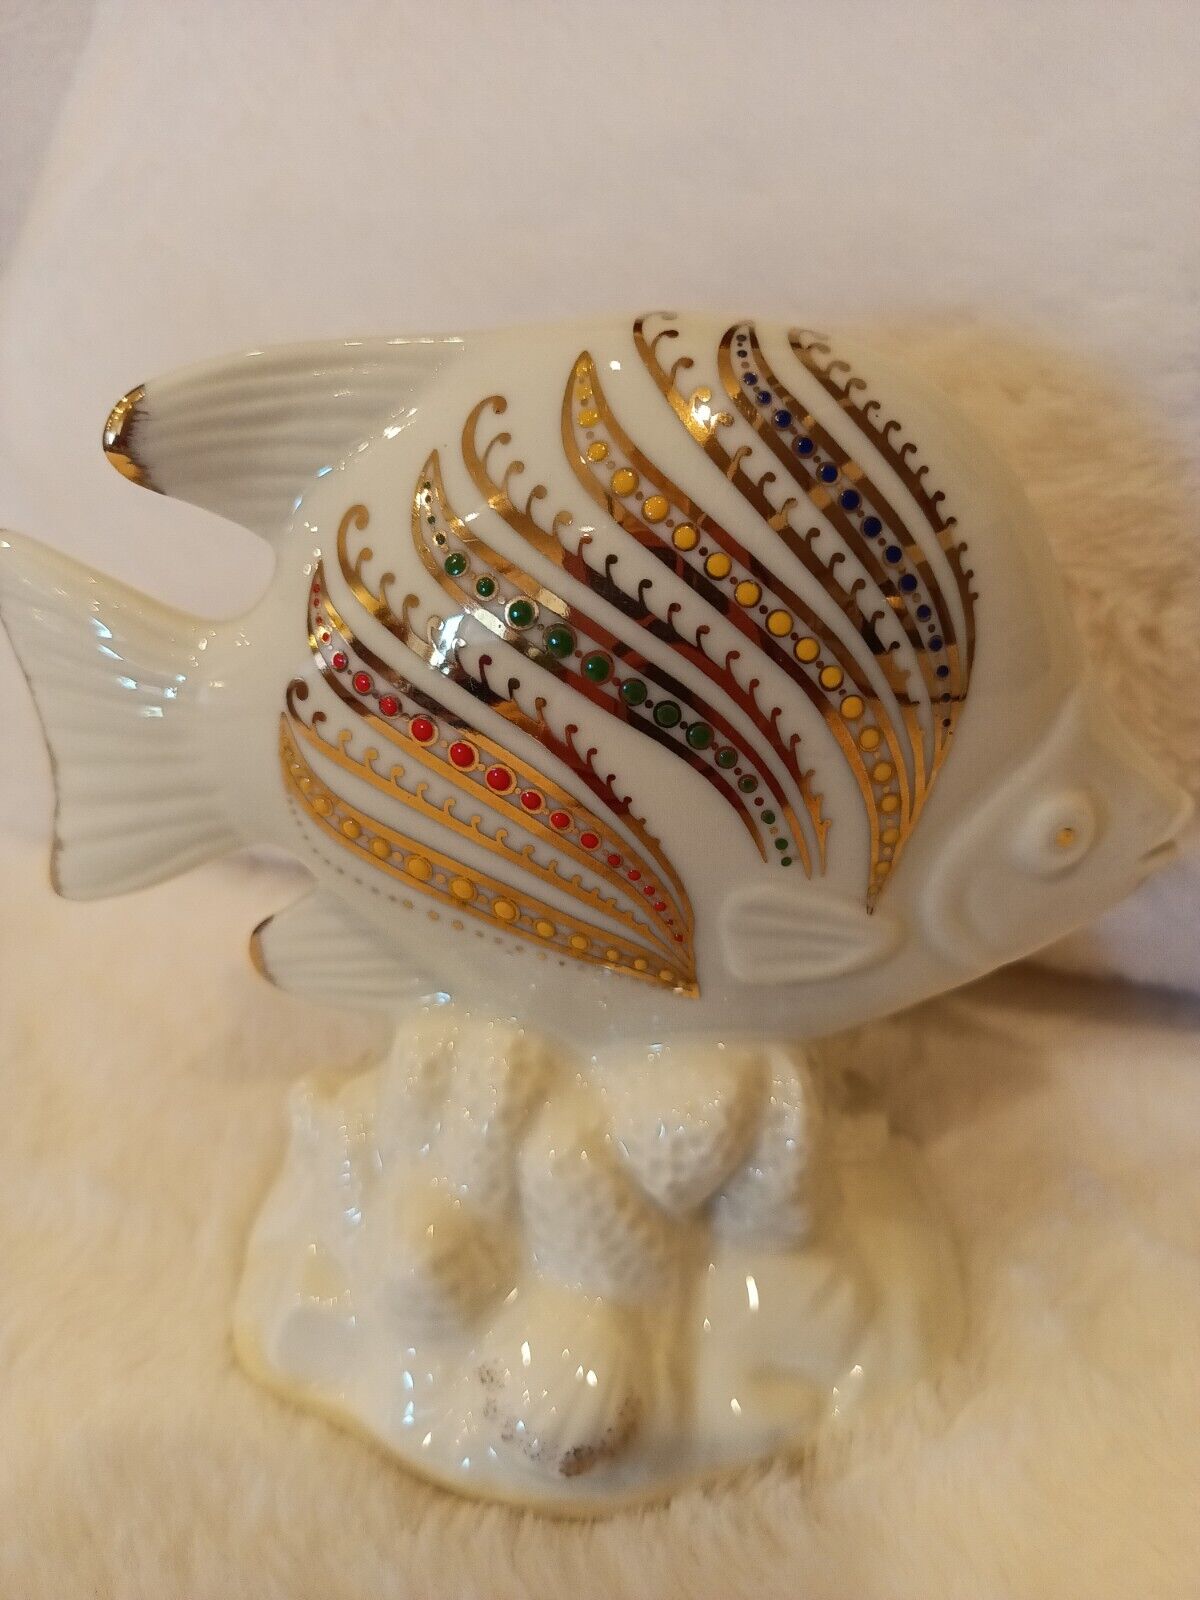 Vtg Fish Figurine Formalities By Baum Bros Hand Painted Gold White Used Grt Cond